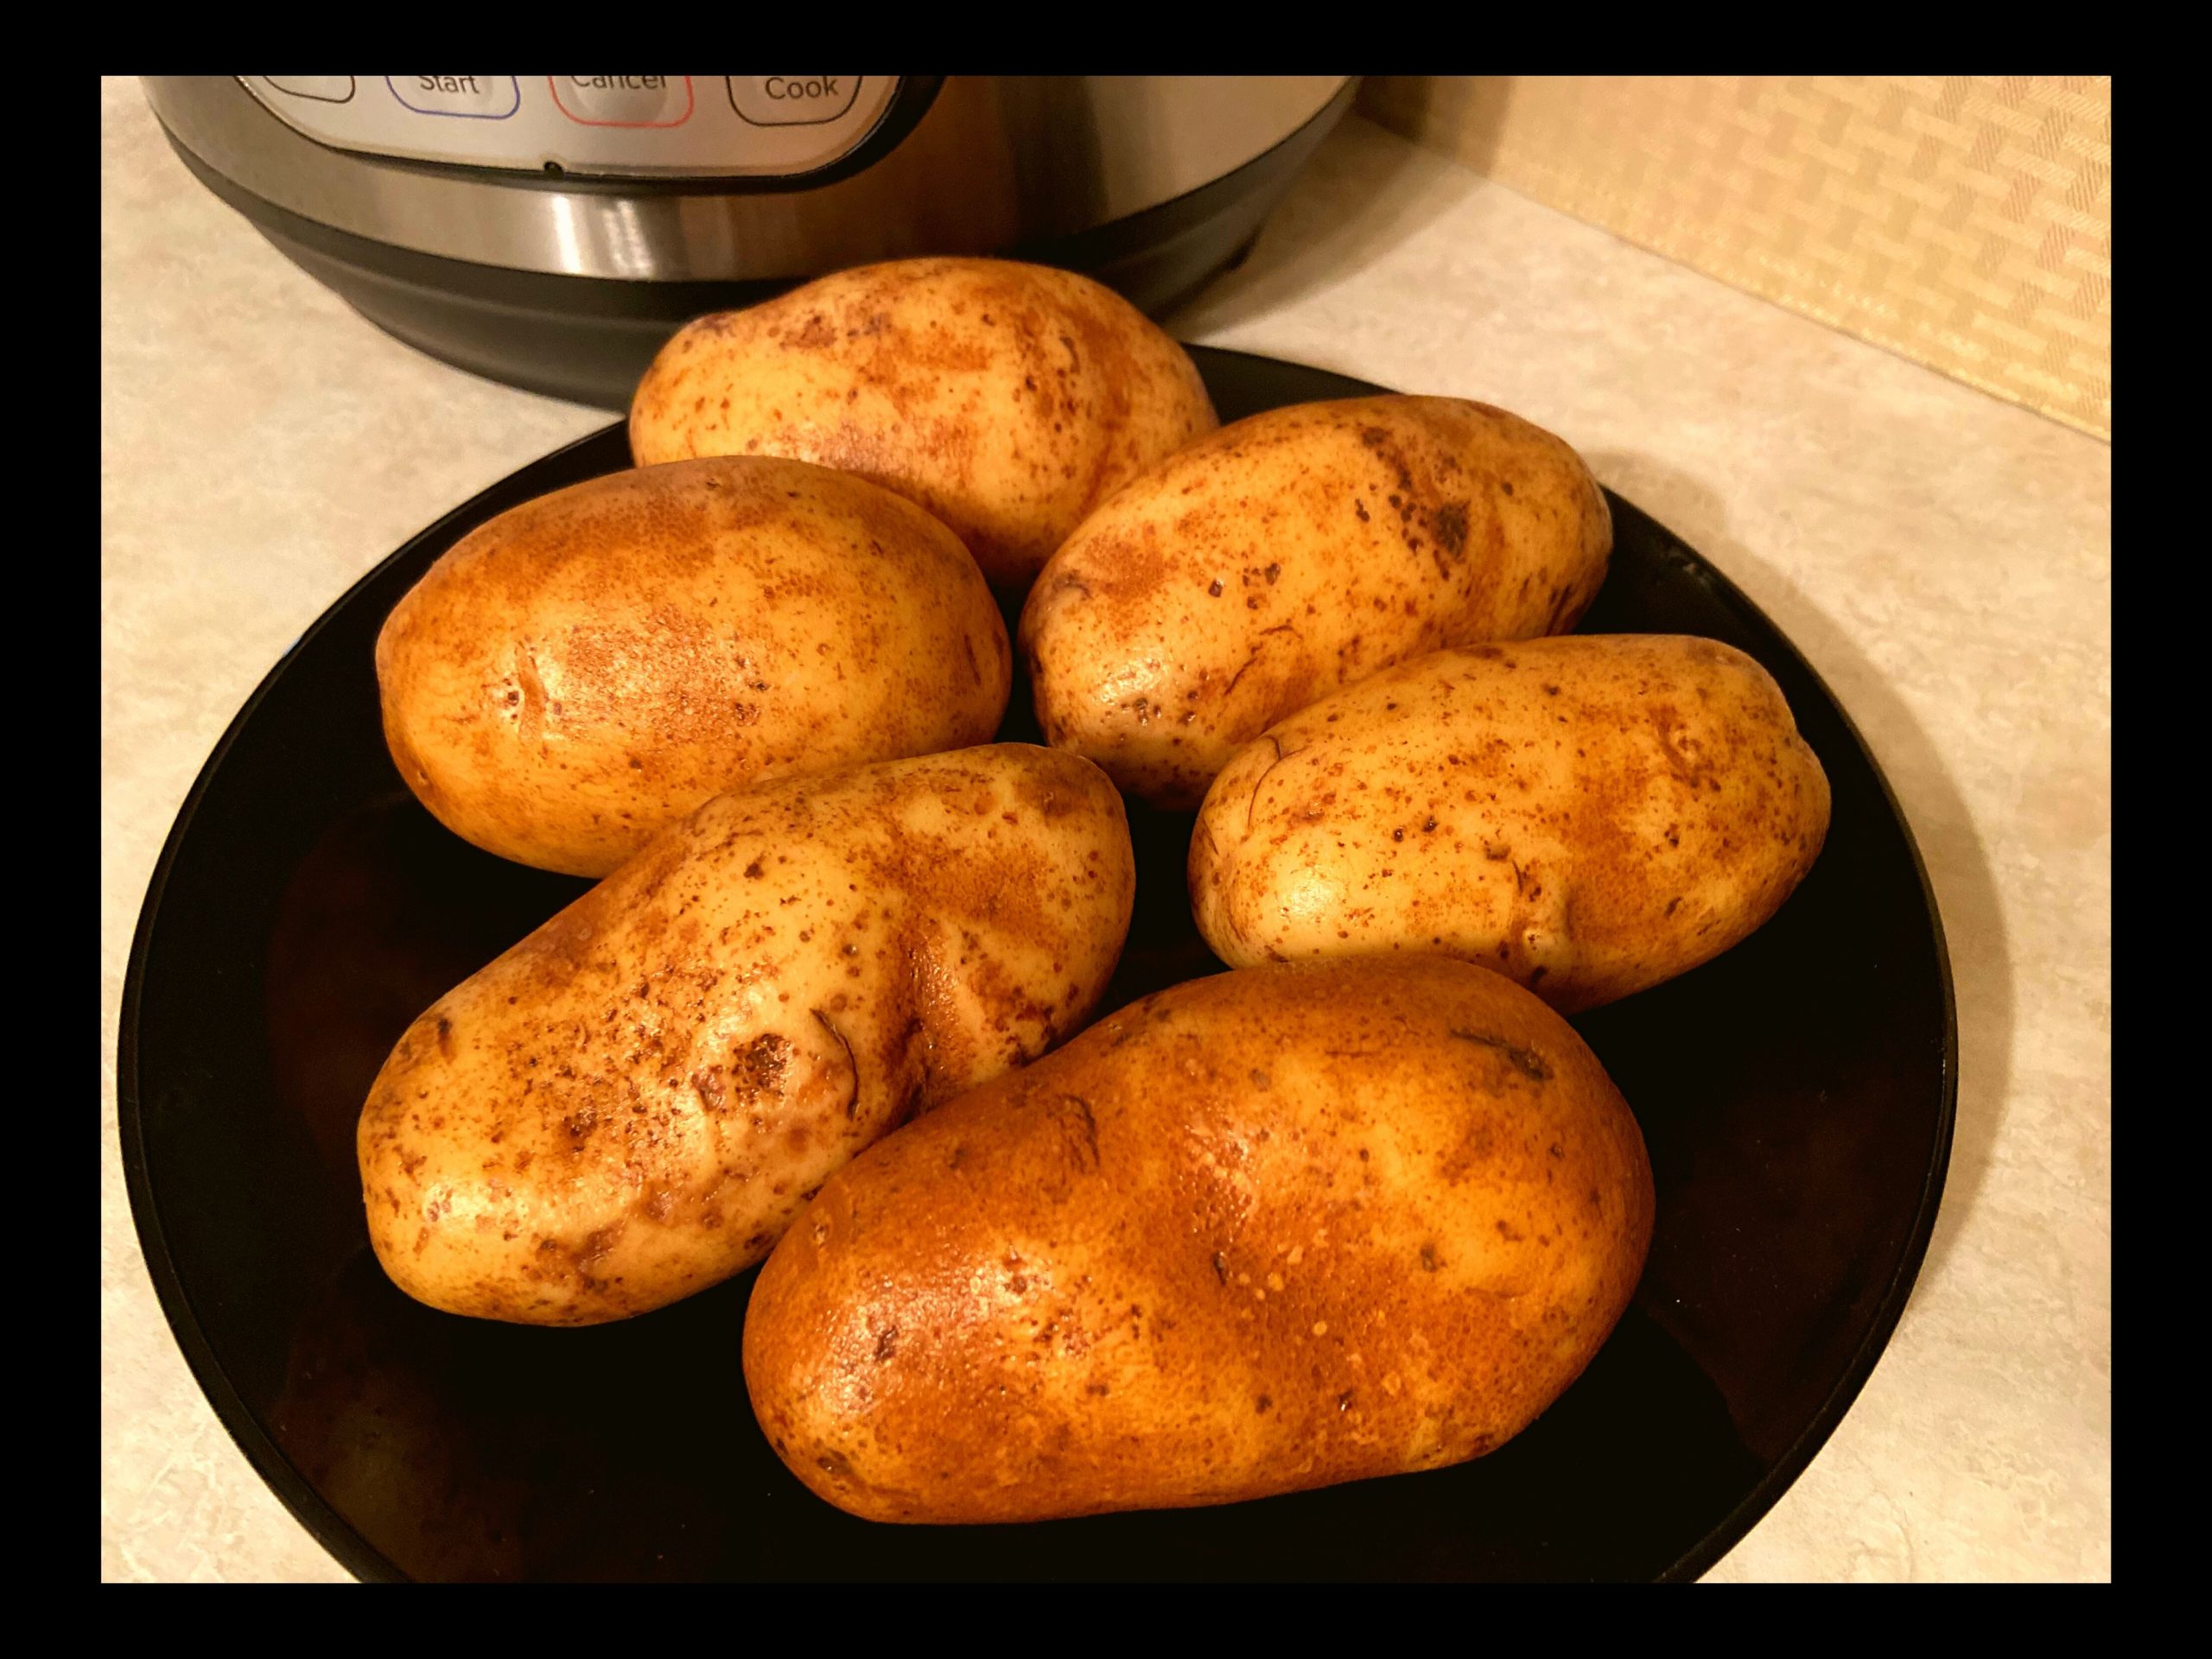 Washed and scrubbed raw potatoes on a black plate in front of an Instant Pot.